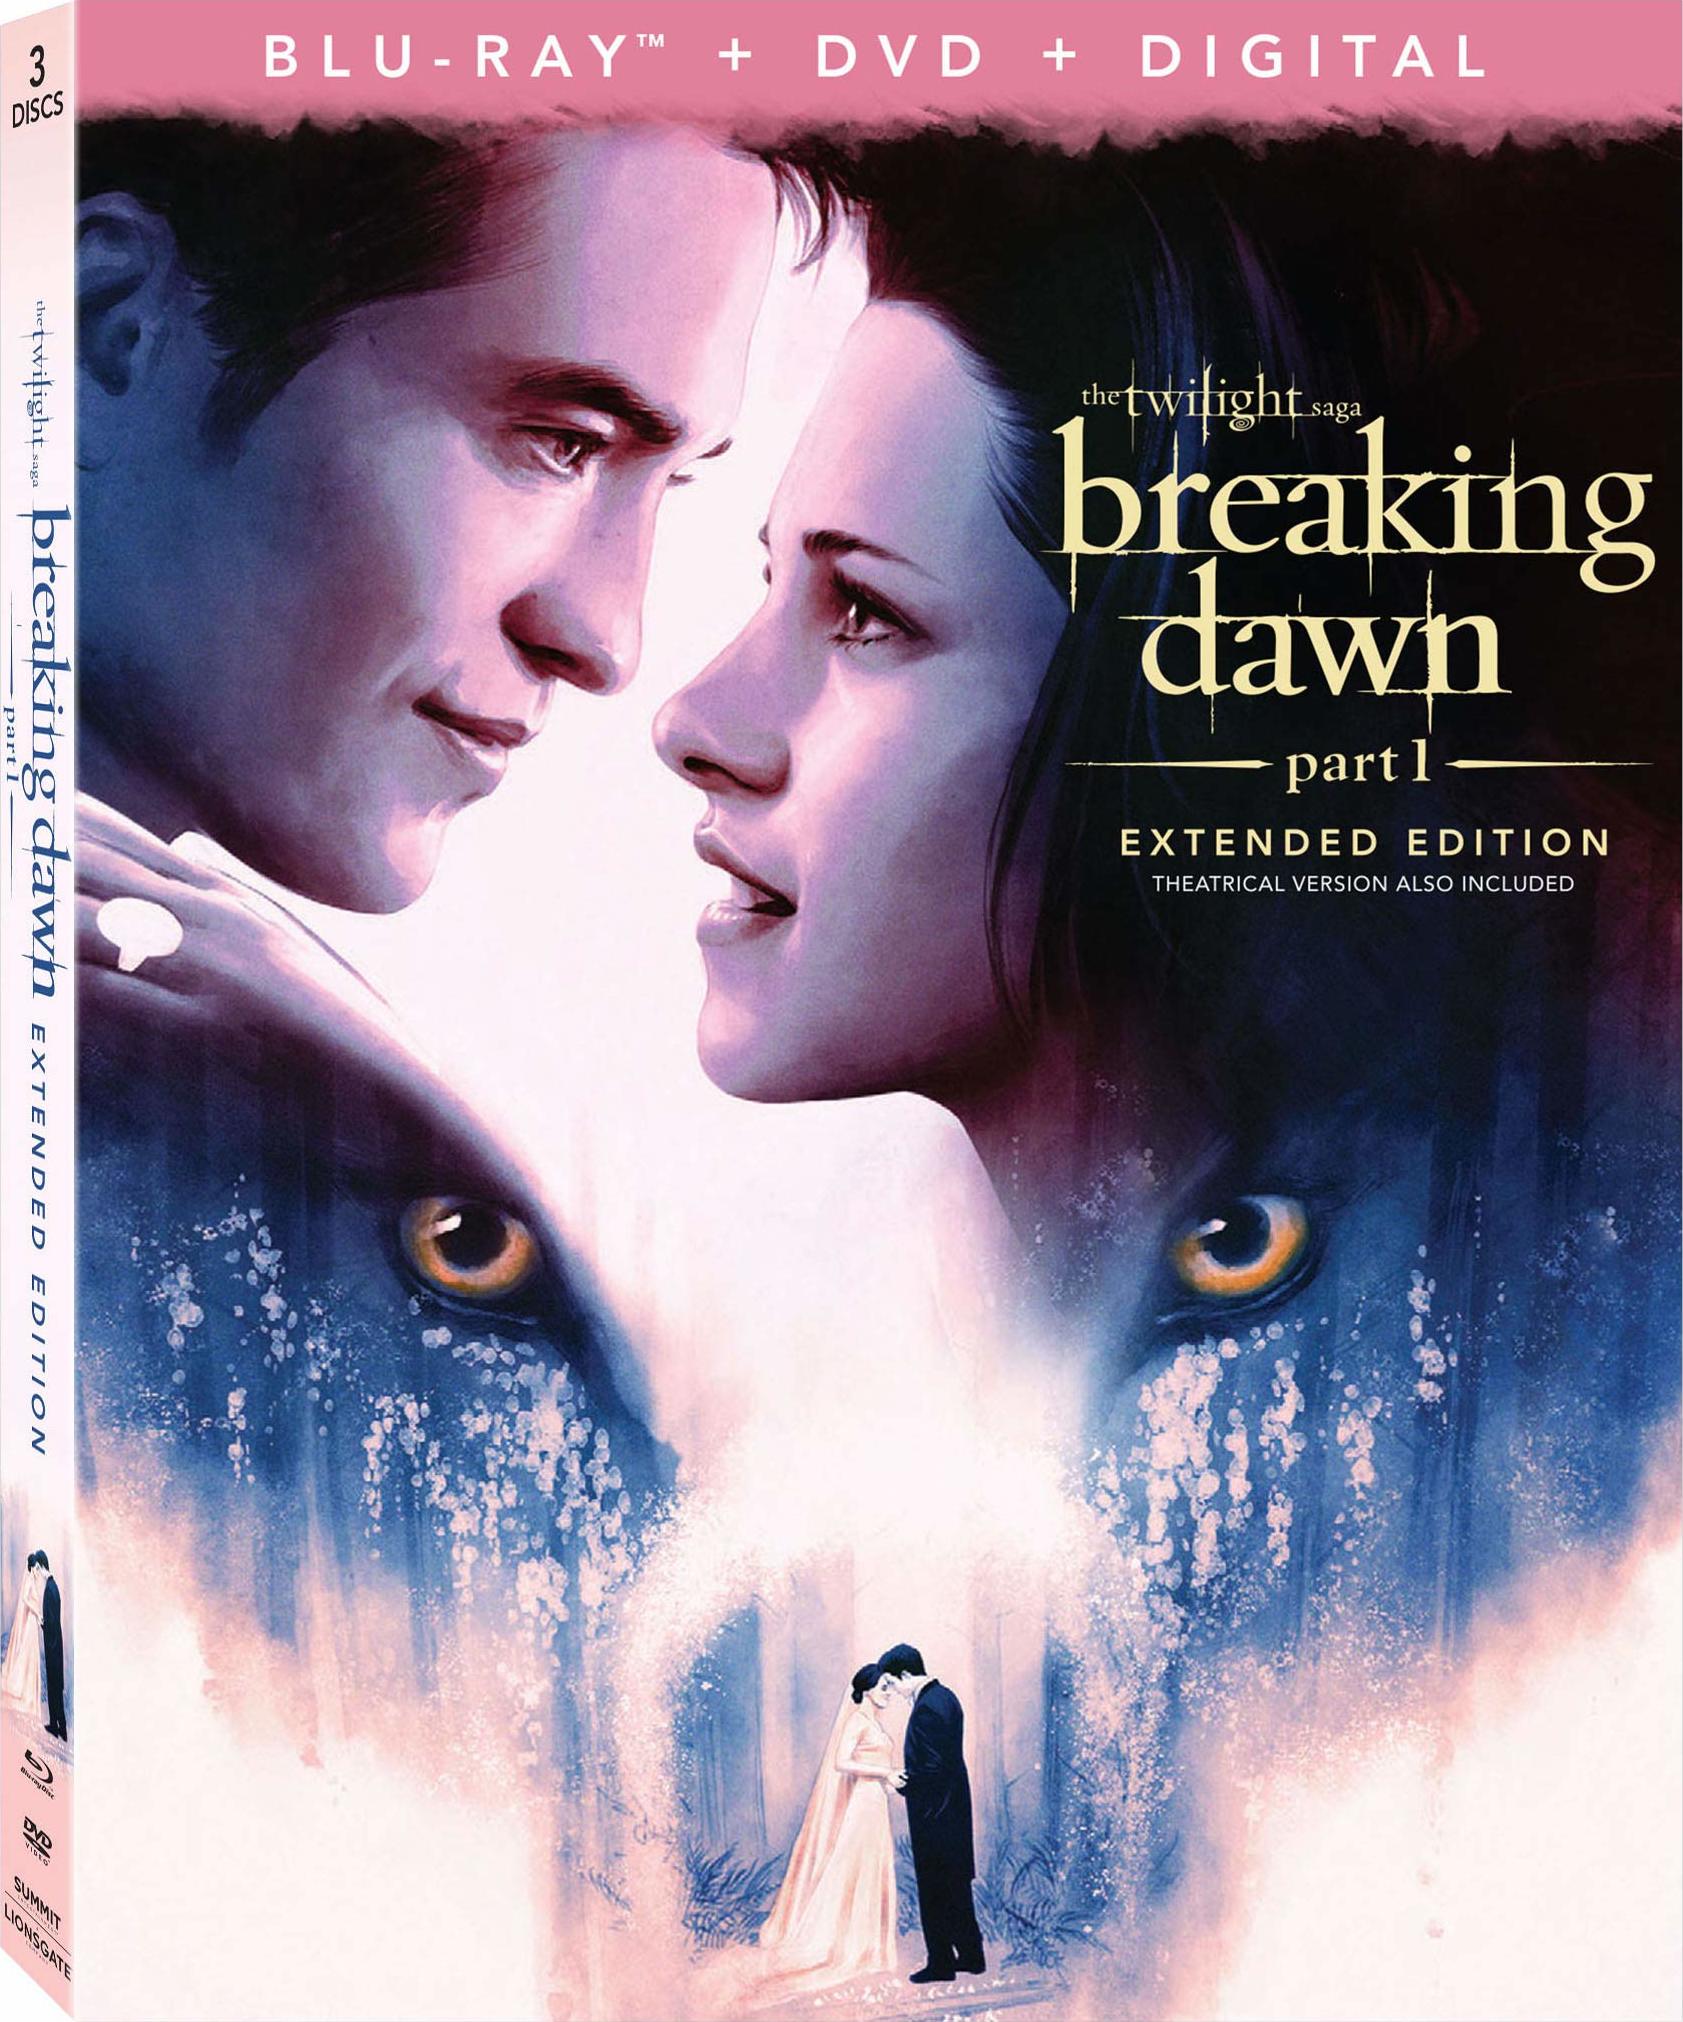 twilight saga breaking dawn part 1 extended edition download torrent